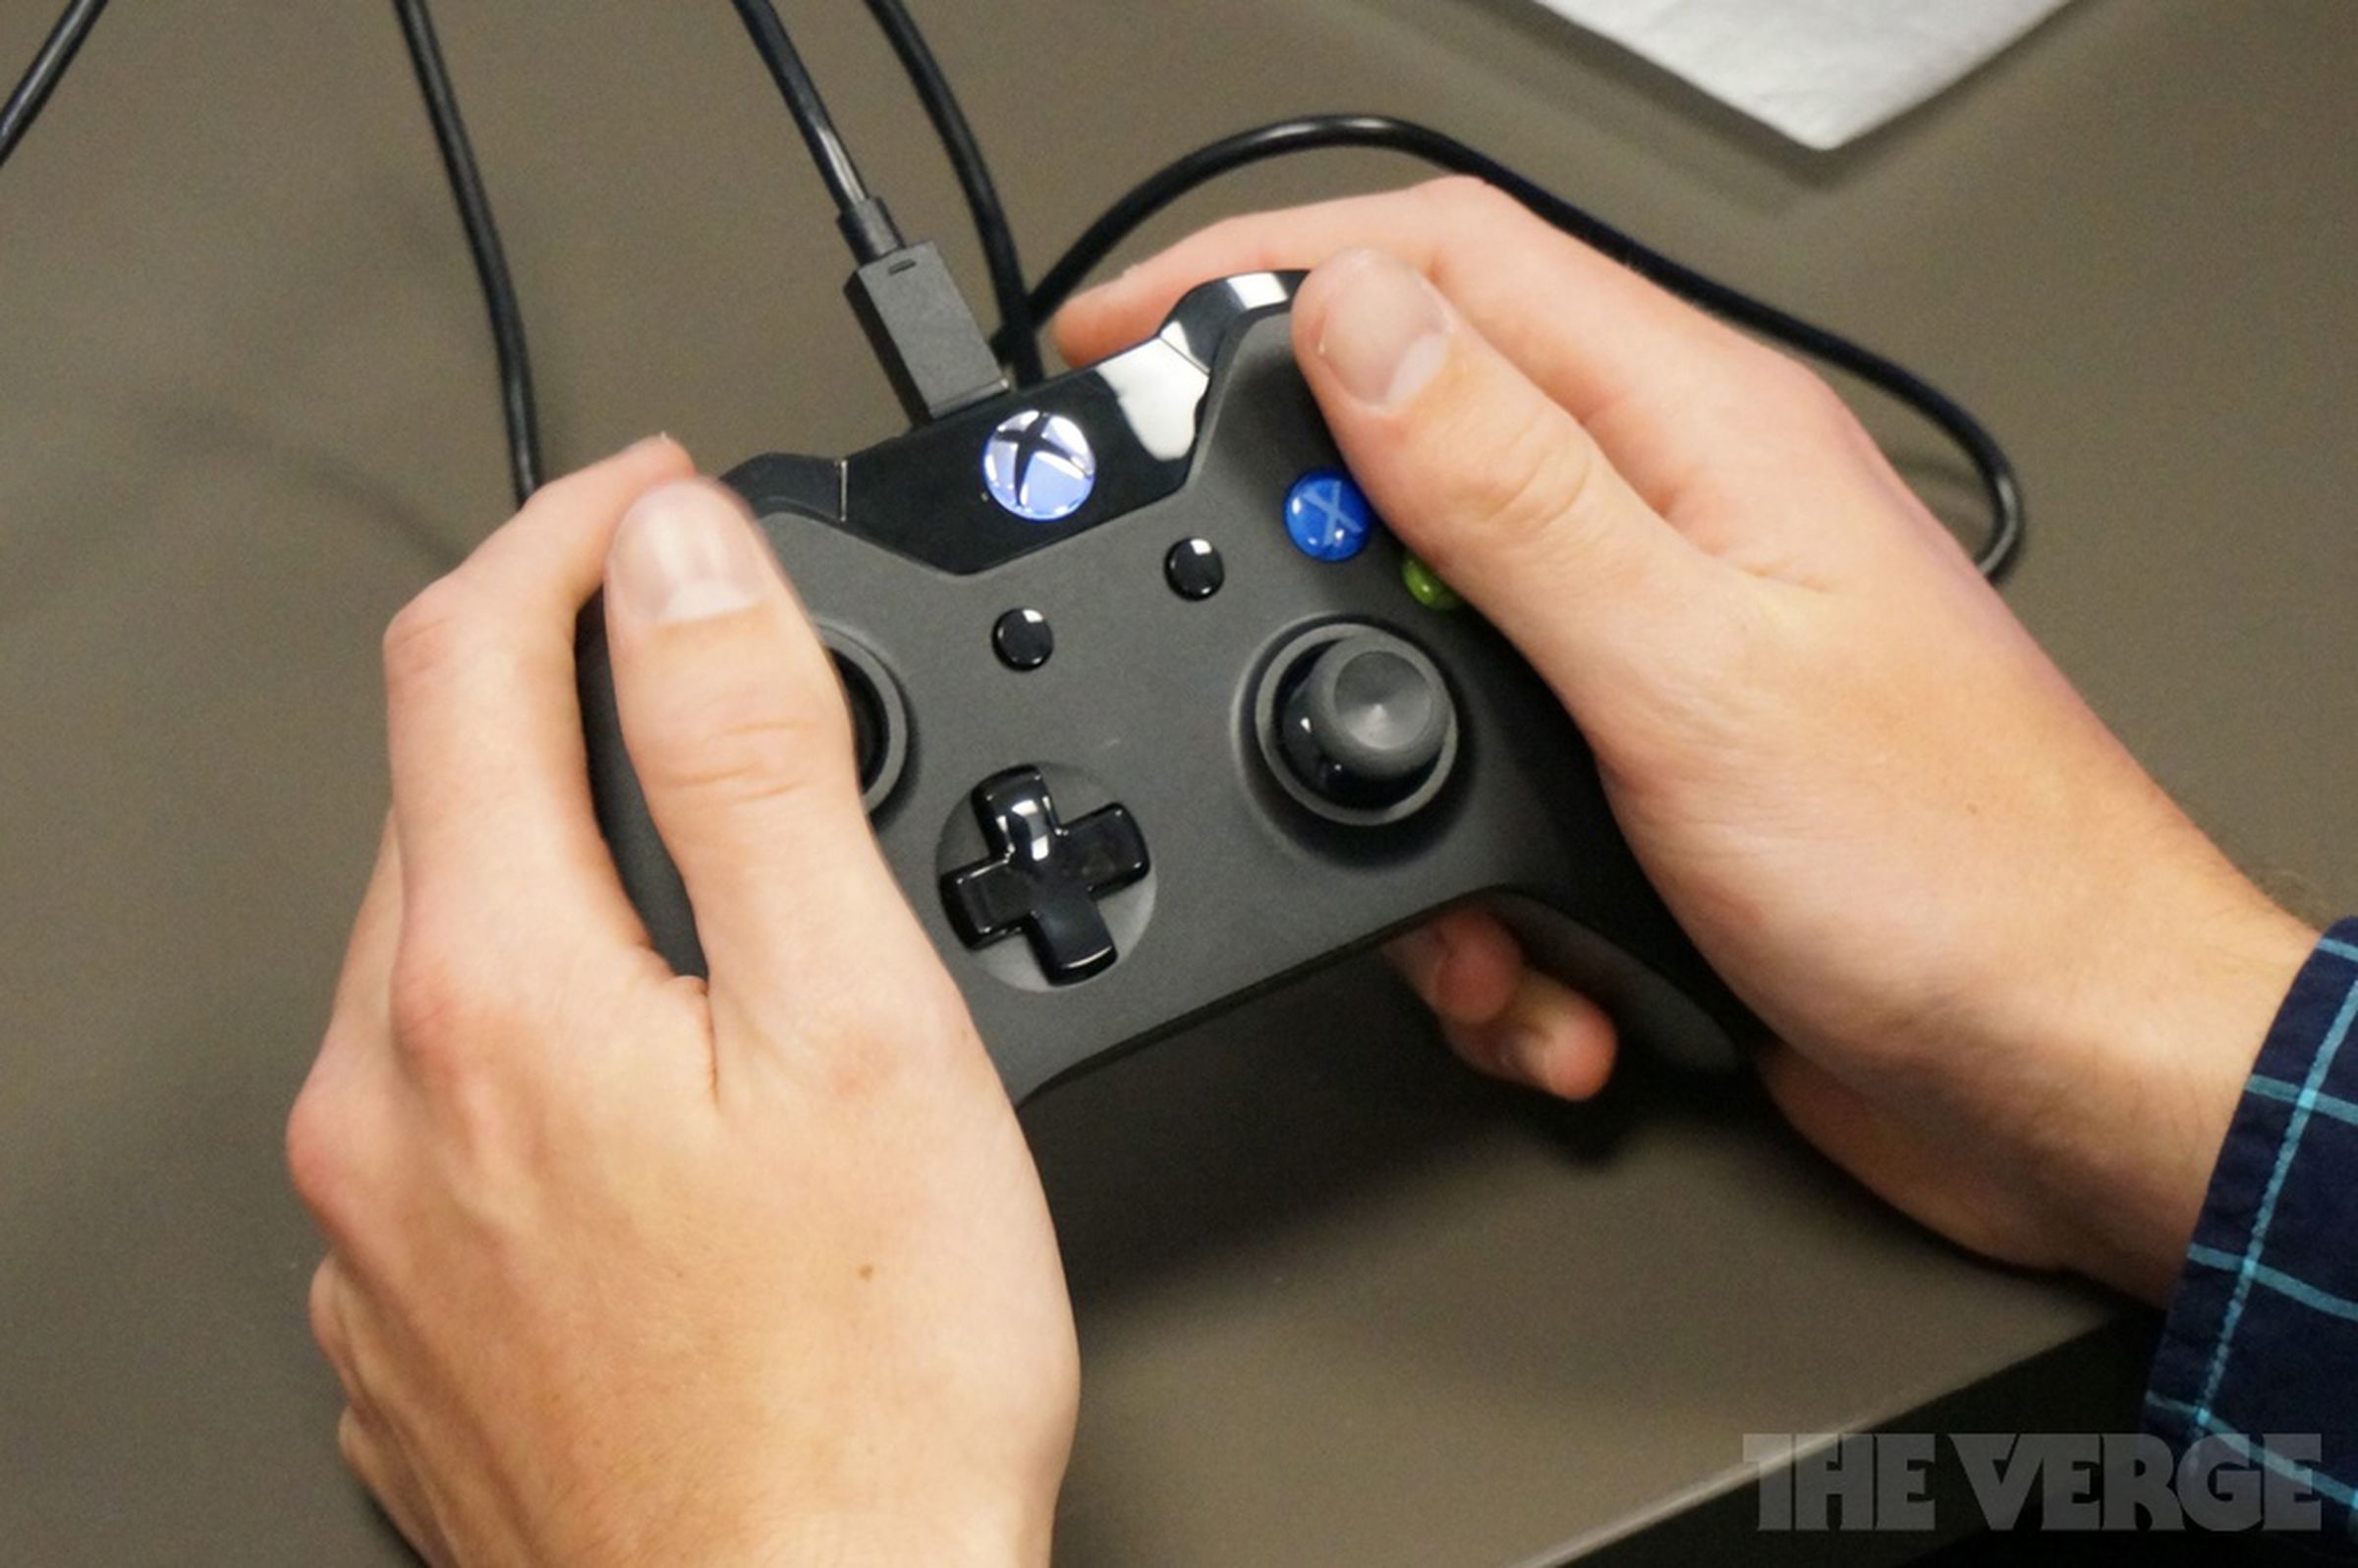 Xbox One controller hands-on photos